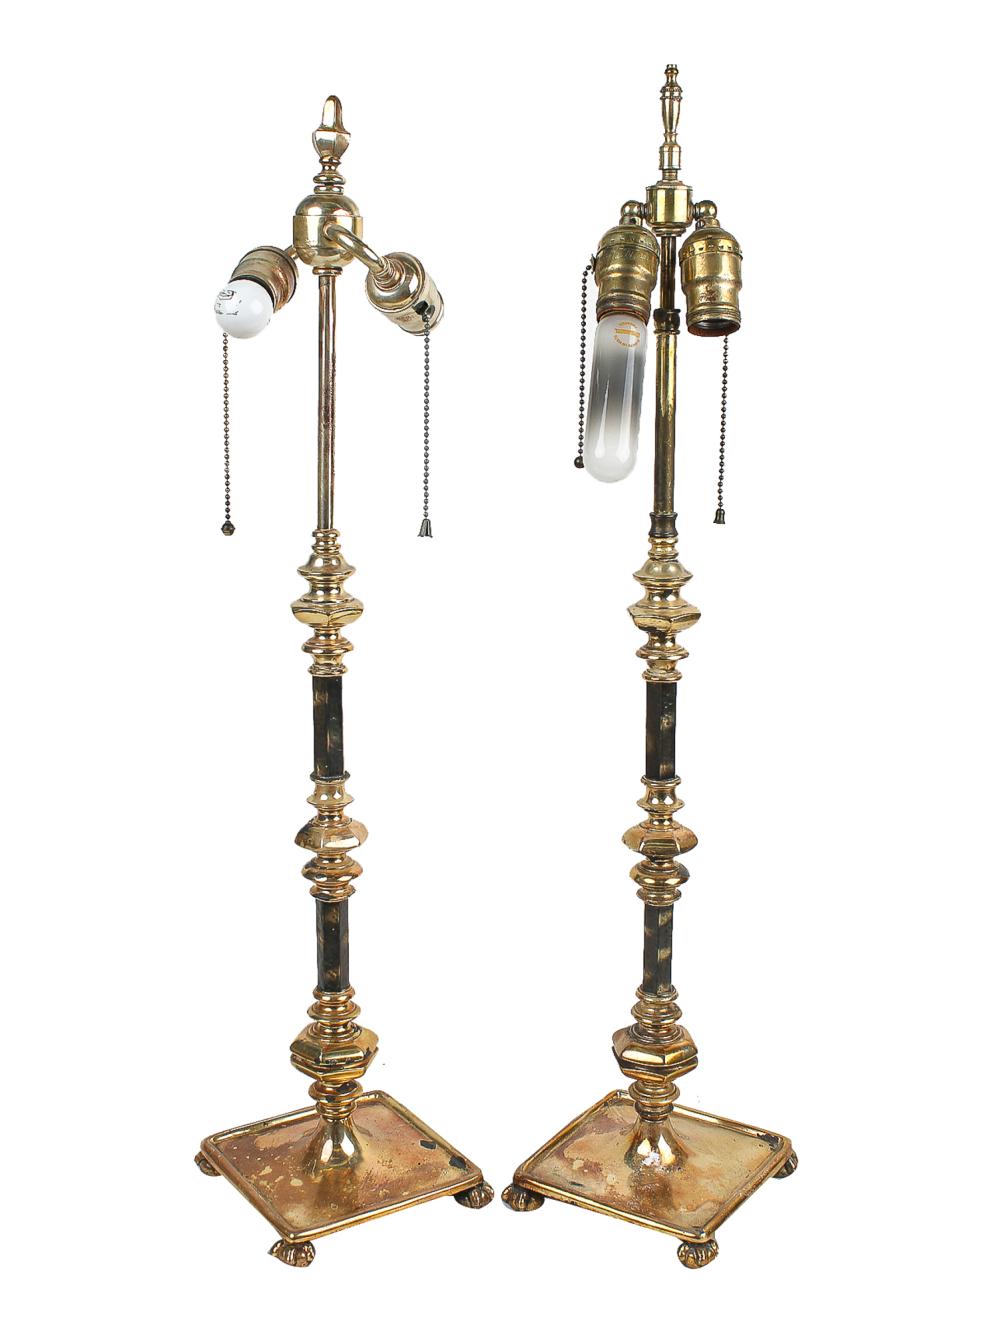 PAIR OF SILVER-PLATE CANDLESTICK